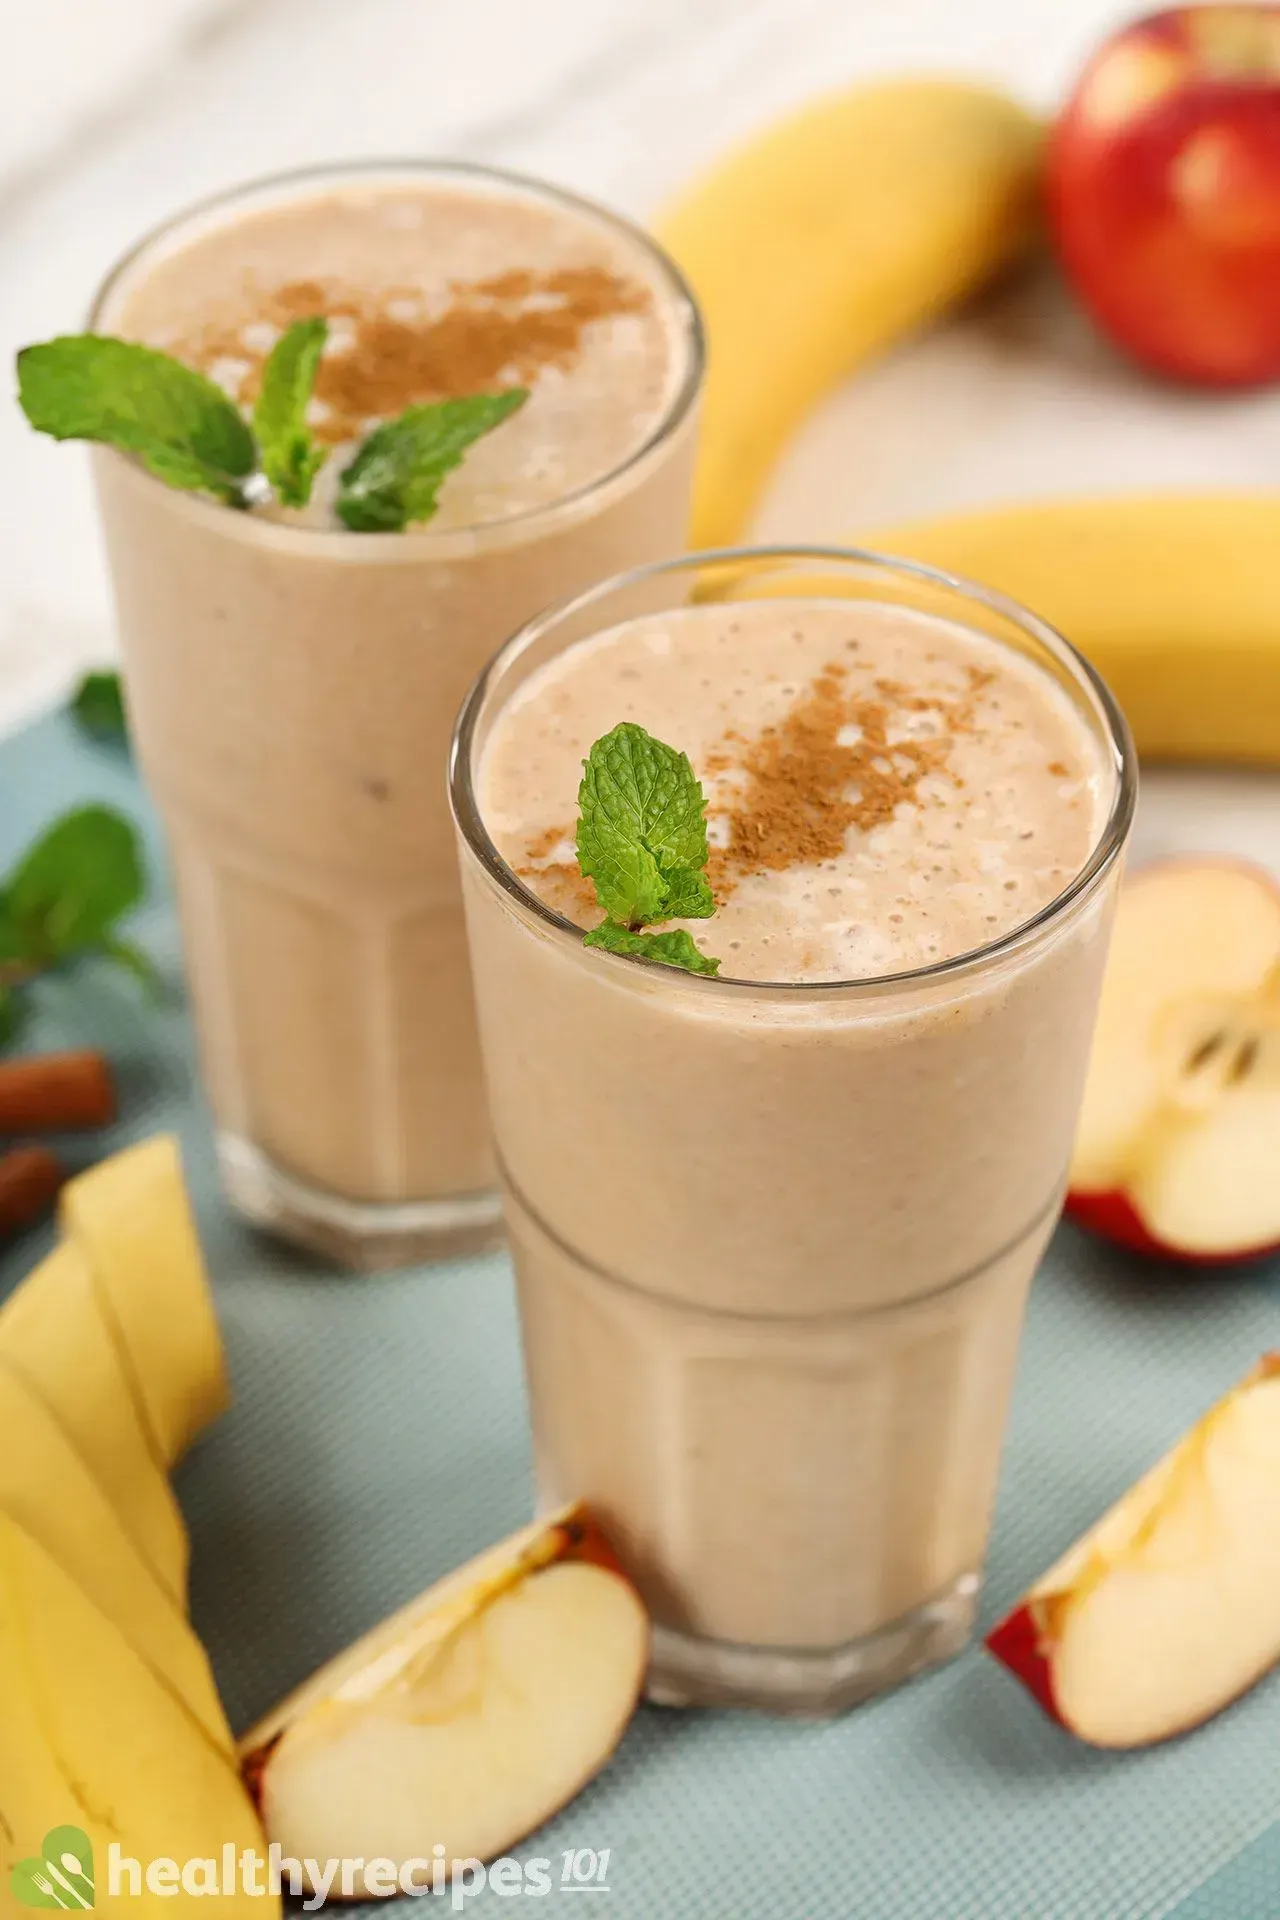 Apple Banana Smoothie Recipe: A Healthy and Filling Beverage